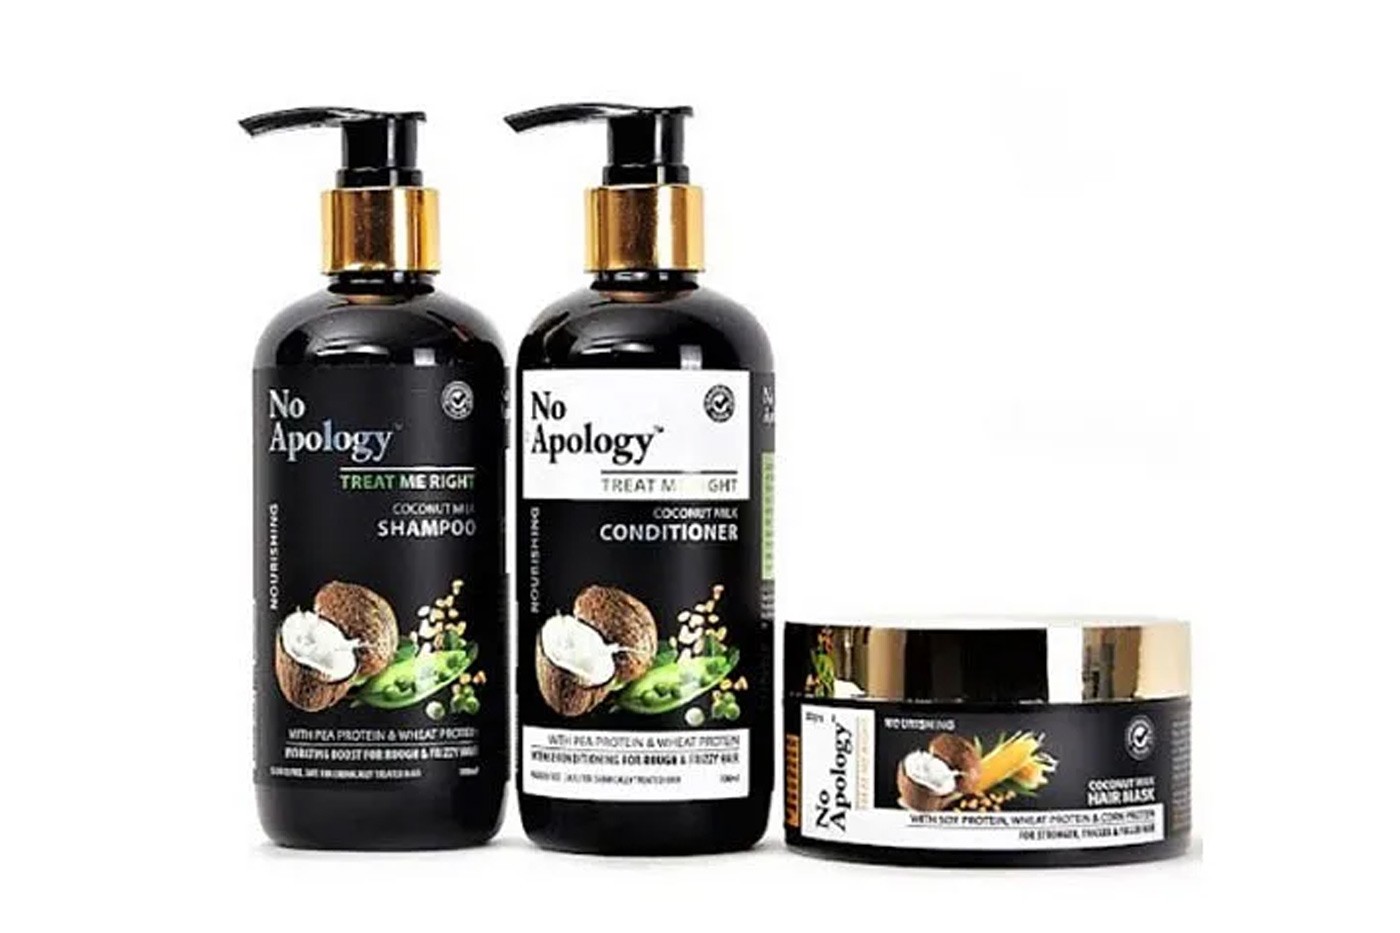 No Apology launches haircare products with Coconut milk first time in India